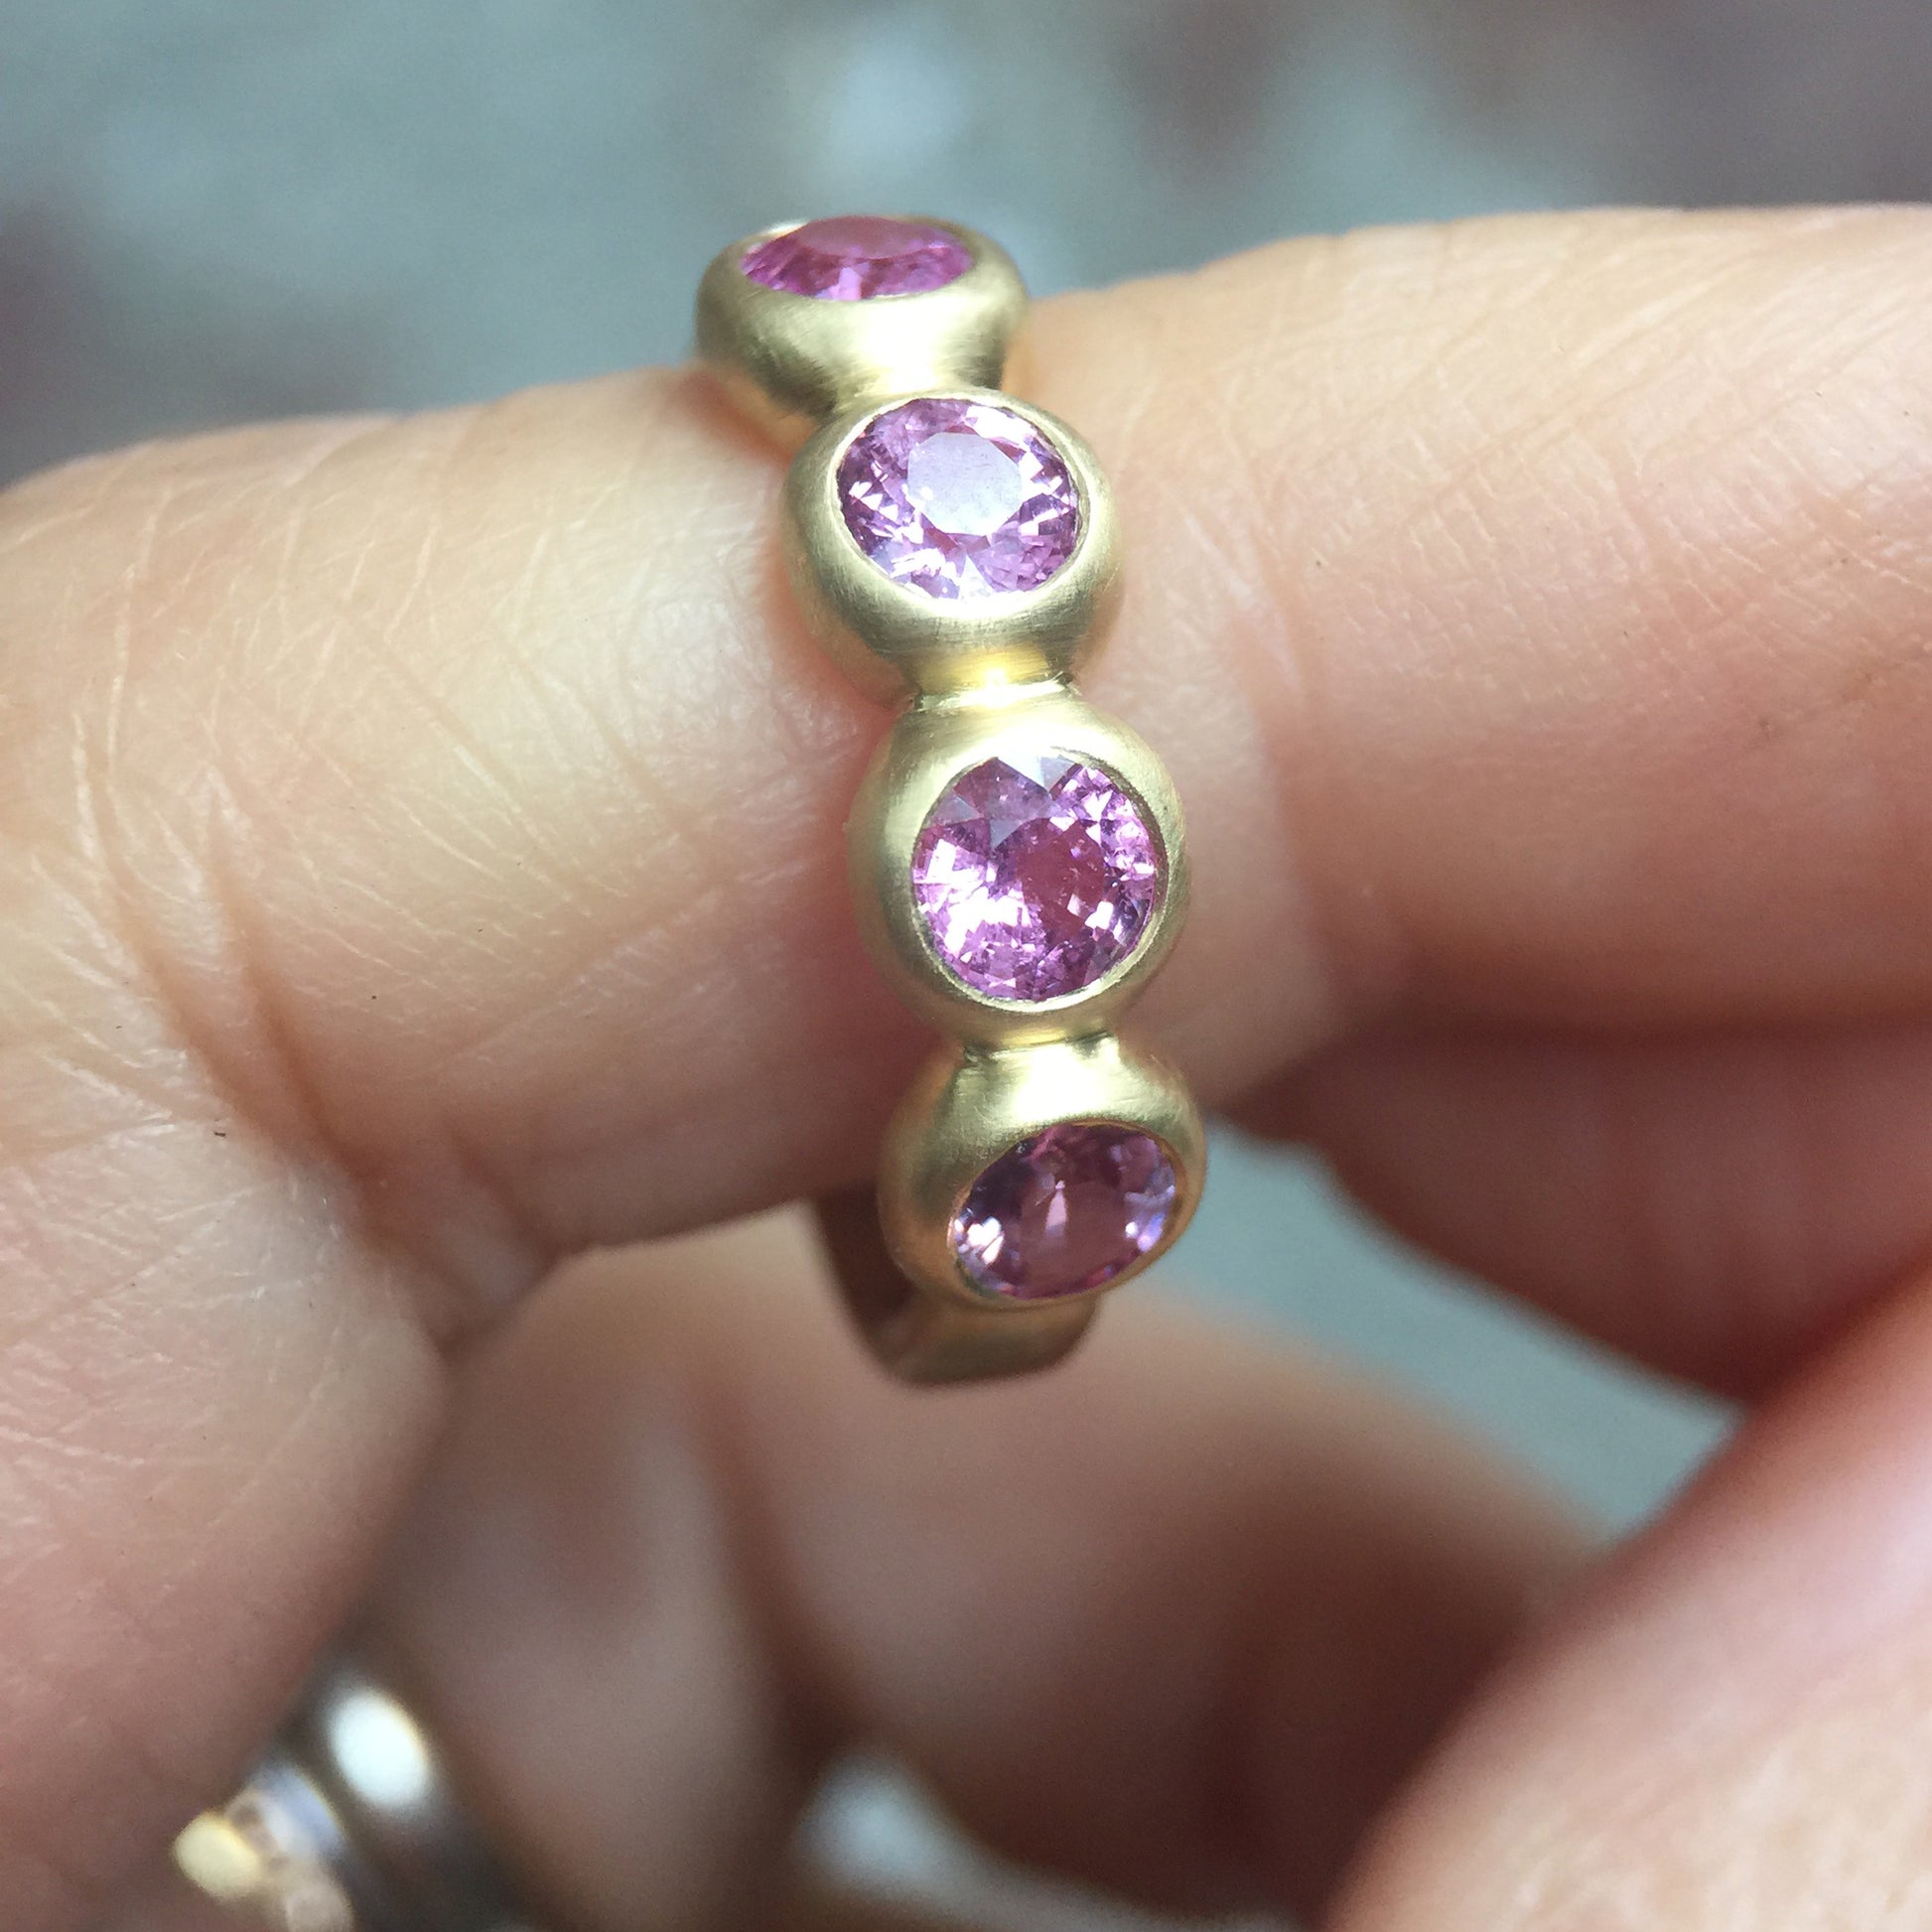 Porch Skimmer Band with 4 mm pink sapphires, detail on finger